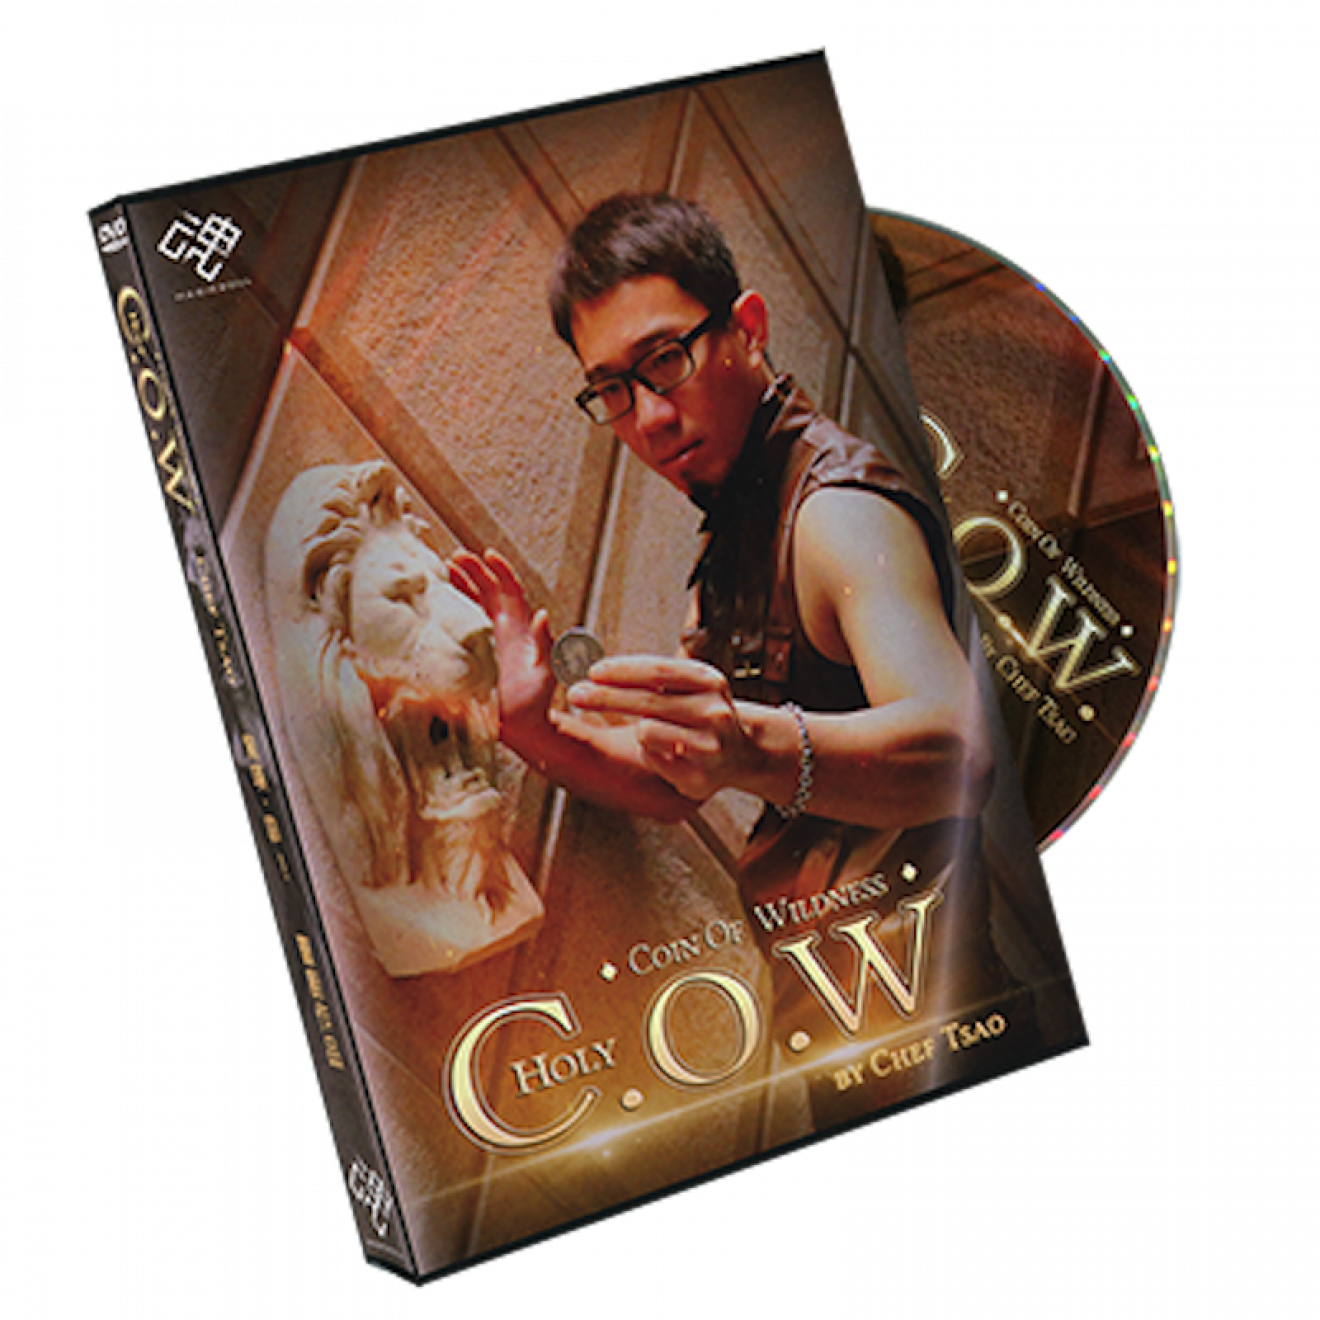 Holy COW (DVD)